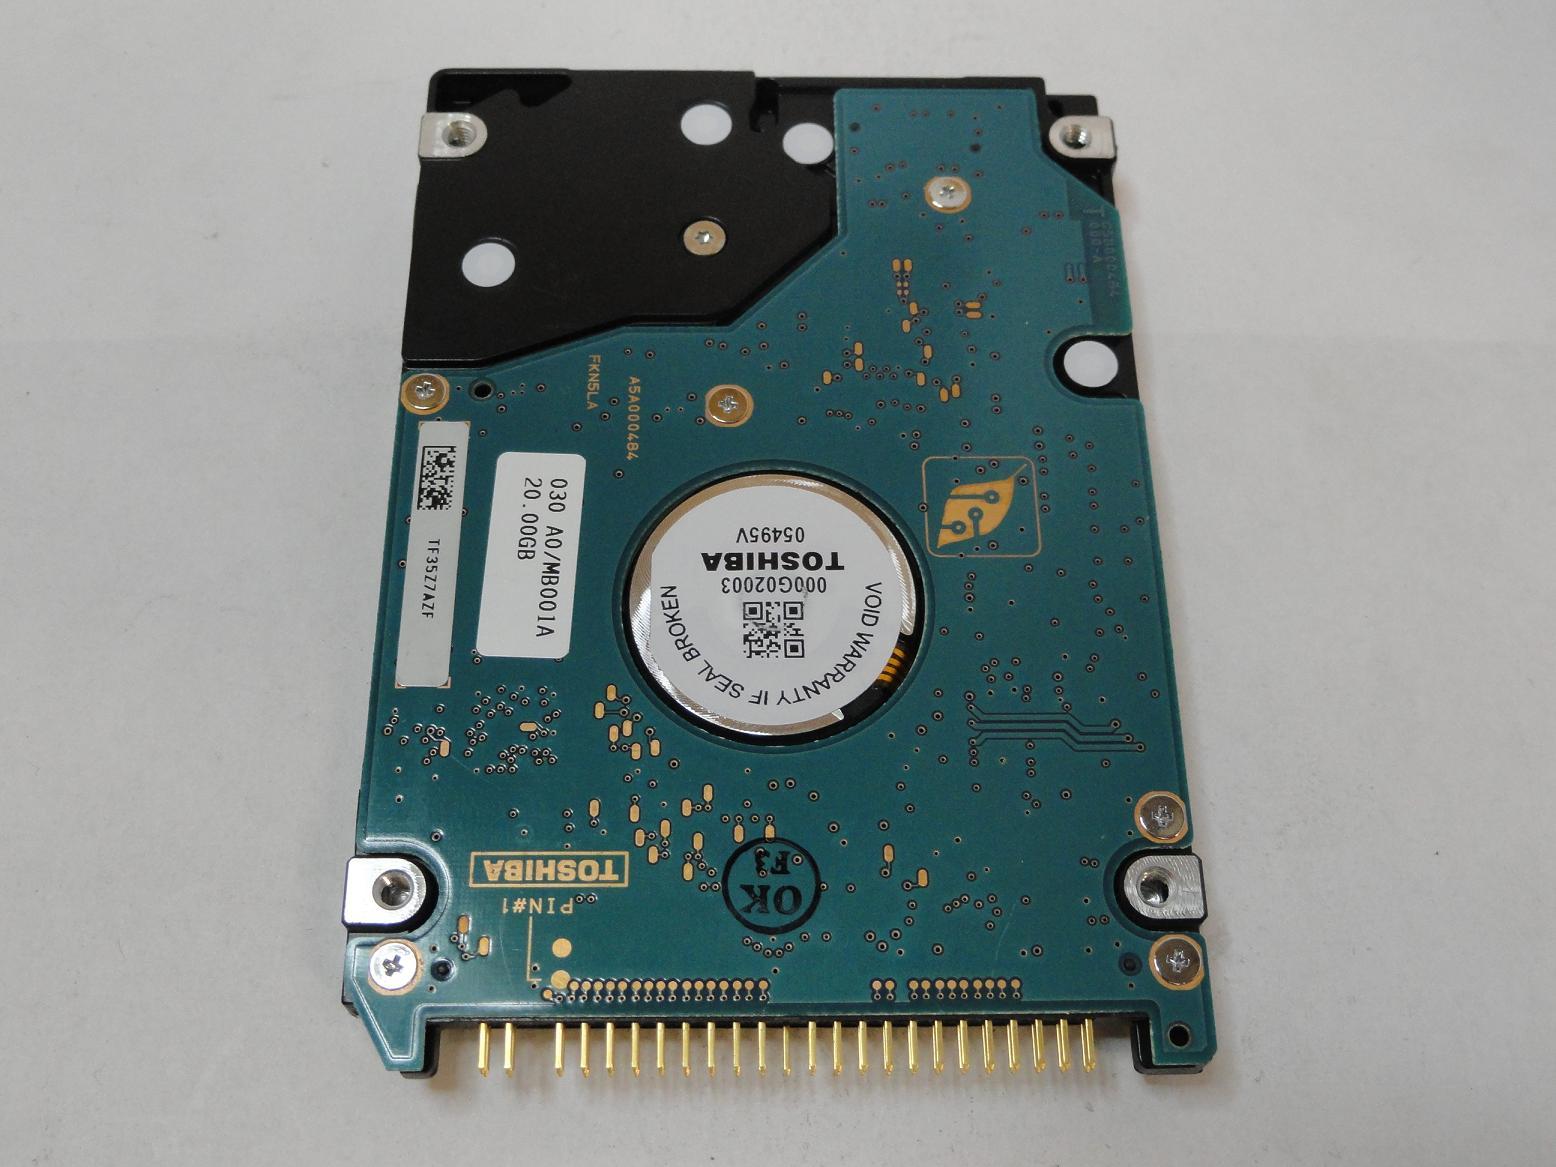 PR14903_HDD2187_Toshiba HP 20GB IDE 5400rpm 3.5in Laptop HDD - Image2